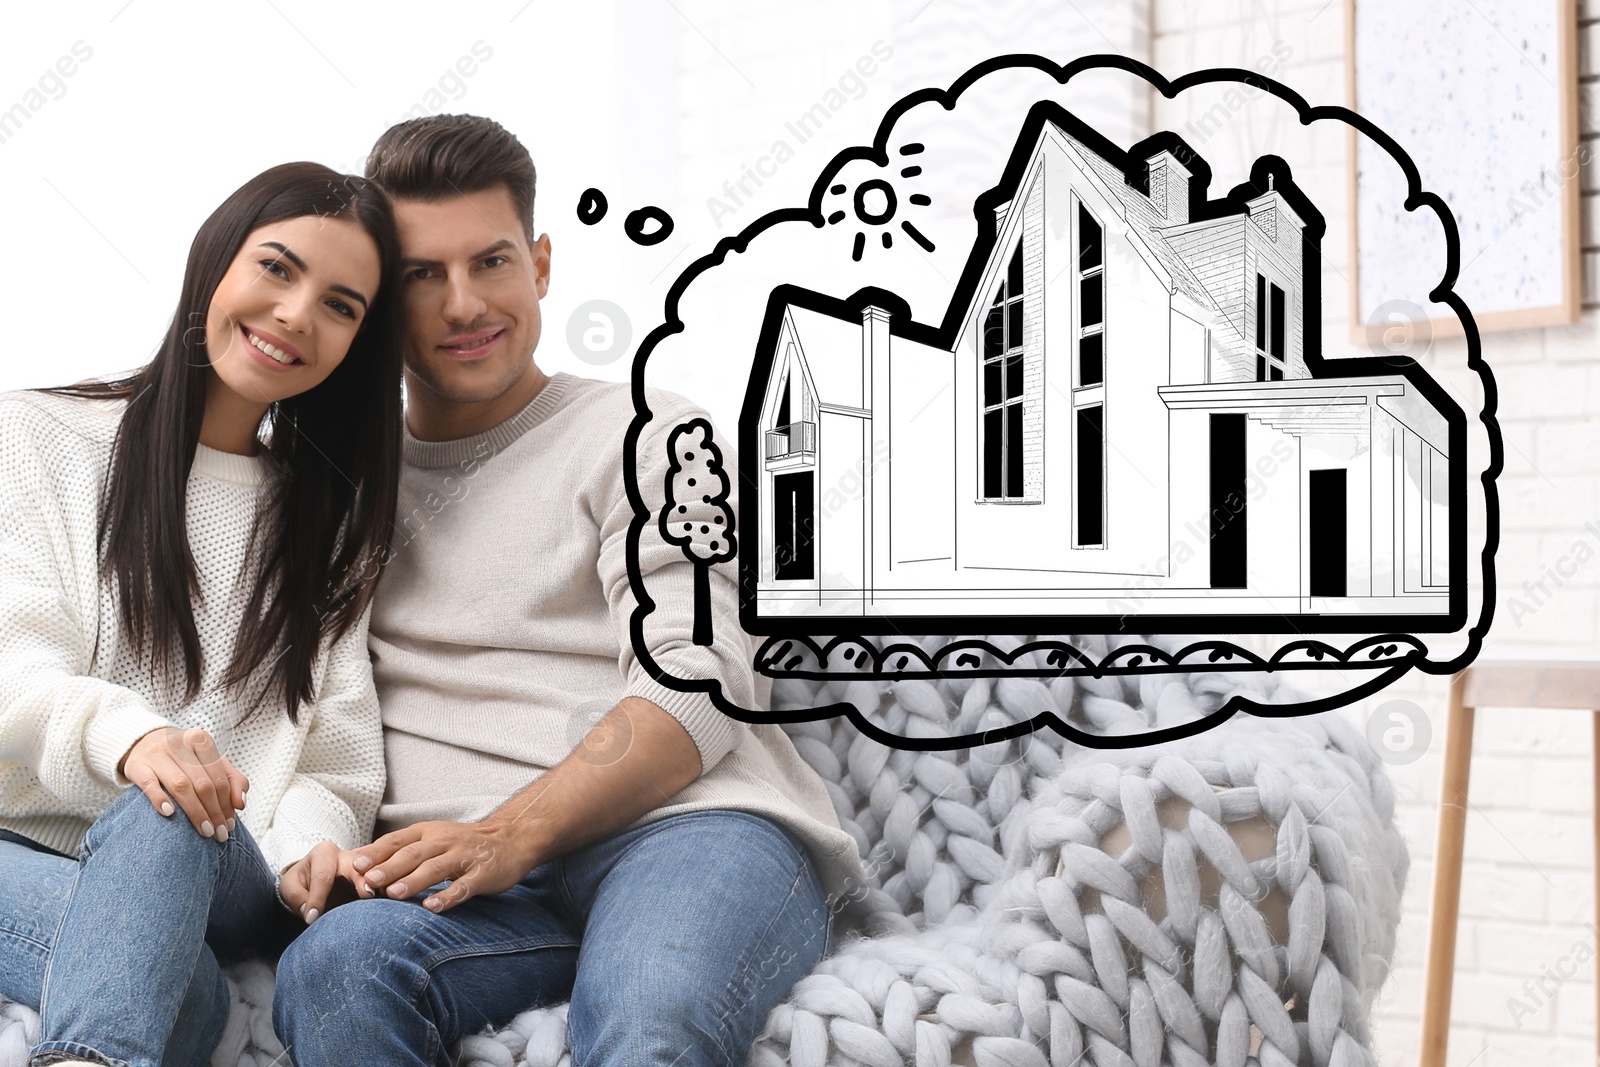 Image of Lovely couple dreaming about new house. Illustration in thought bubble